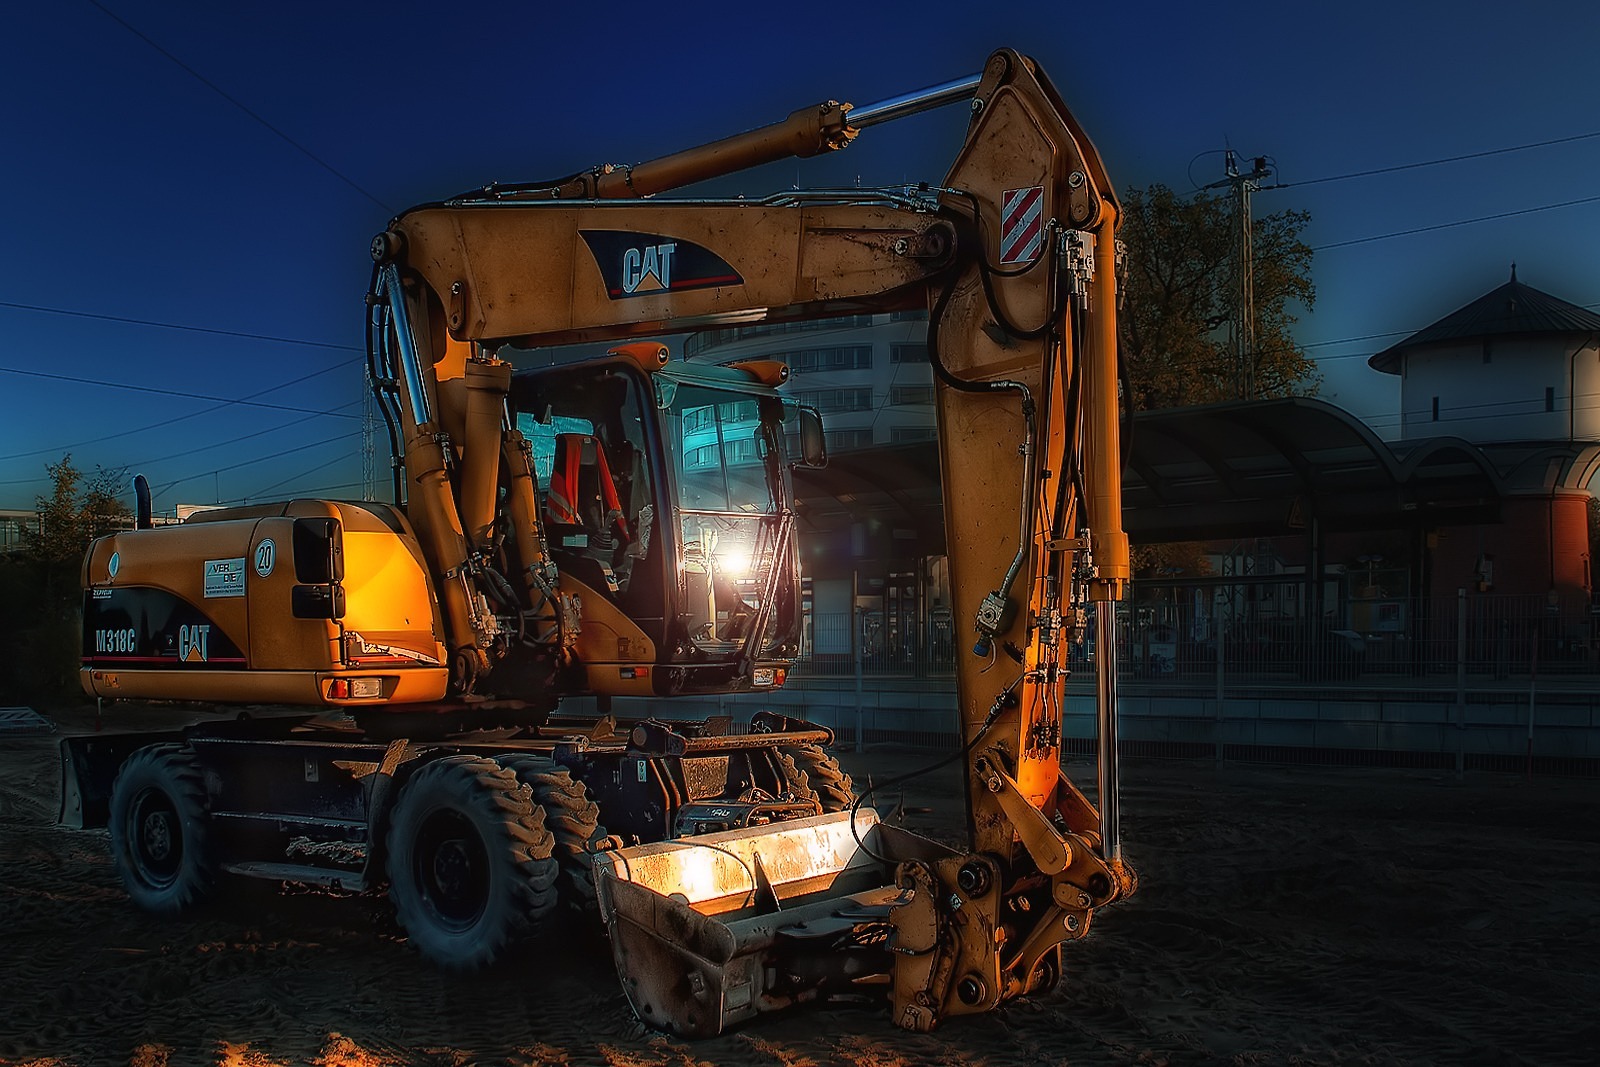 There are miltiple electrical risks when diggers and other equipment are used on site